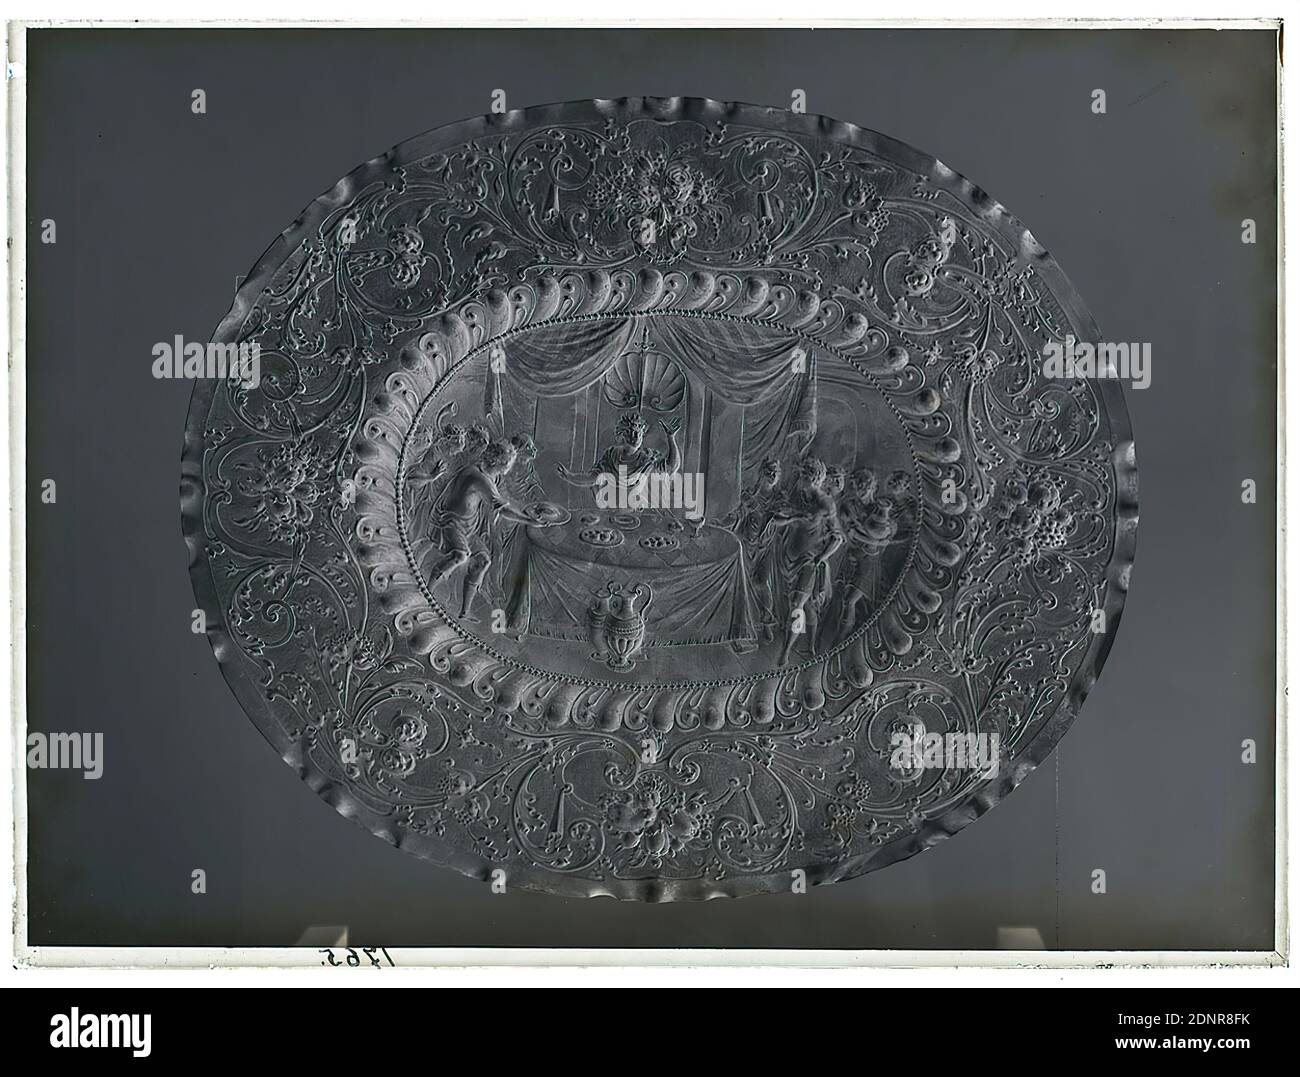 Wilhelm Weimar, plate (show plate) with depiction of the Sword of Damocles, glass negative, black and white negative process, total: height: 23.8 cm; width: 17.8 cm, numbered: u. li. : in black ink: 1765, photography, Work of applied art (precious metals), Dinner service, Dinnerware, Ornaments, Sword, Food and drink, Plate, Arts and crafts, Arts and crafts, Industrial design, Classical mythology/Antique history, Greek heroes art reproductions of his own holdings, foreign objects, architectural and exhibition photographs Stock Photo